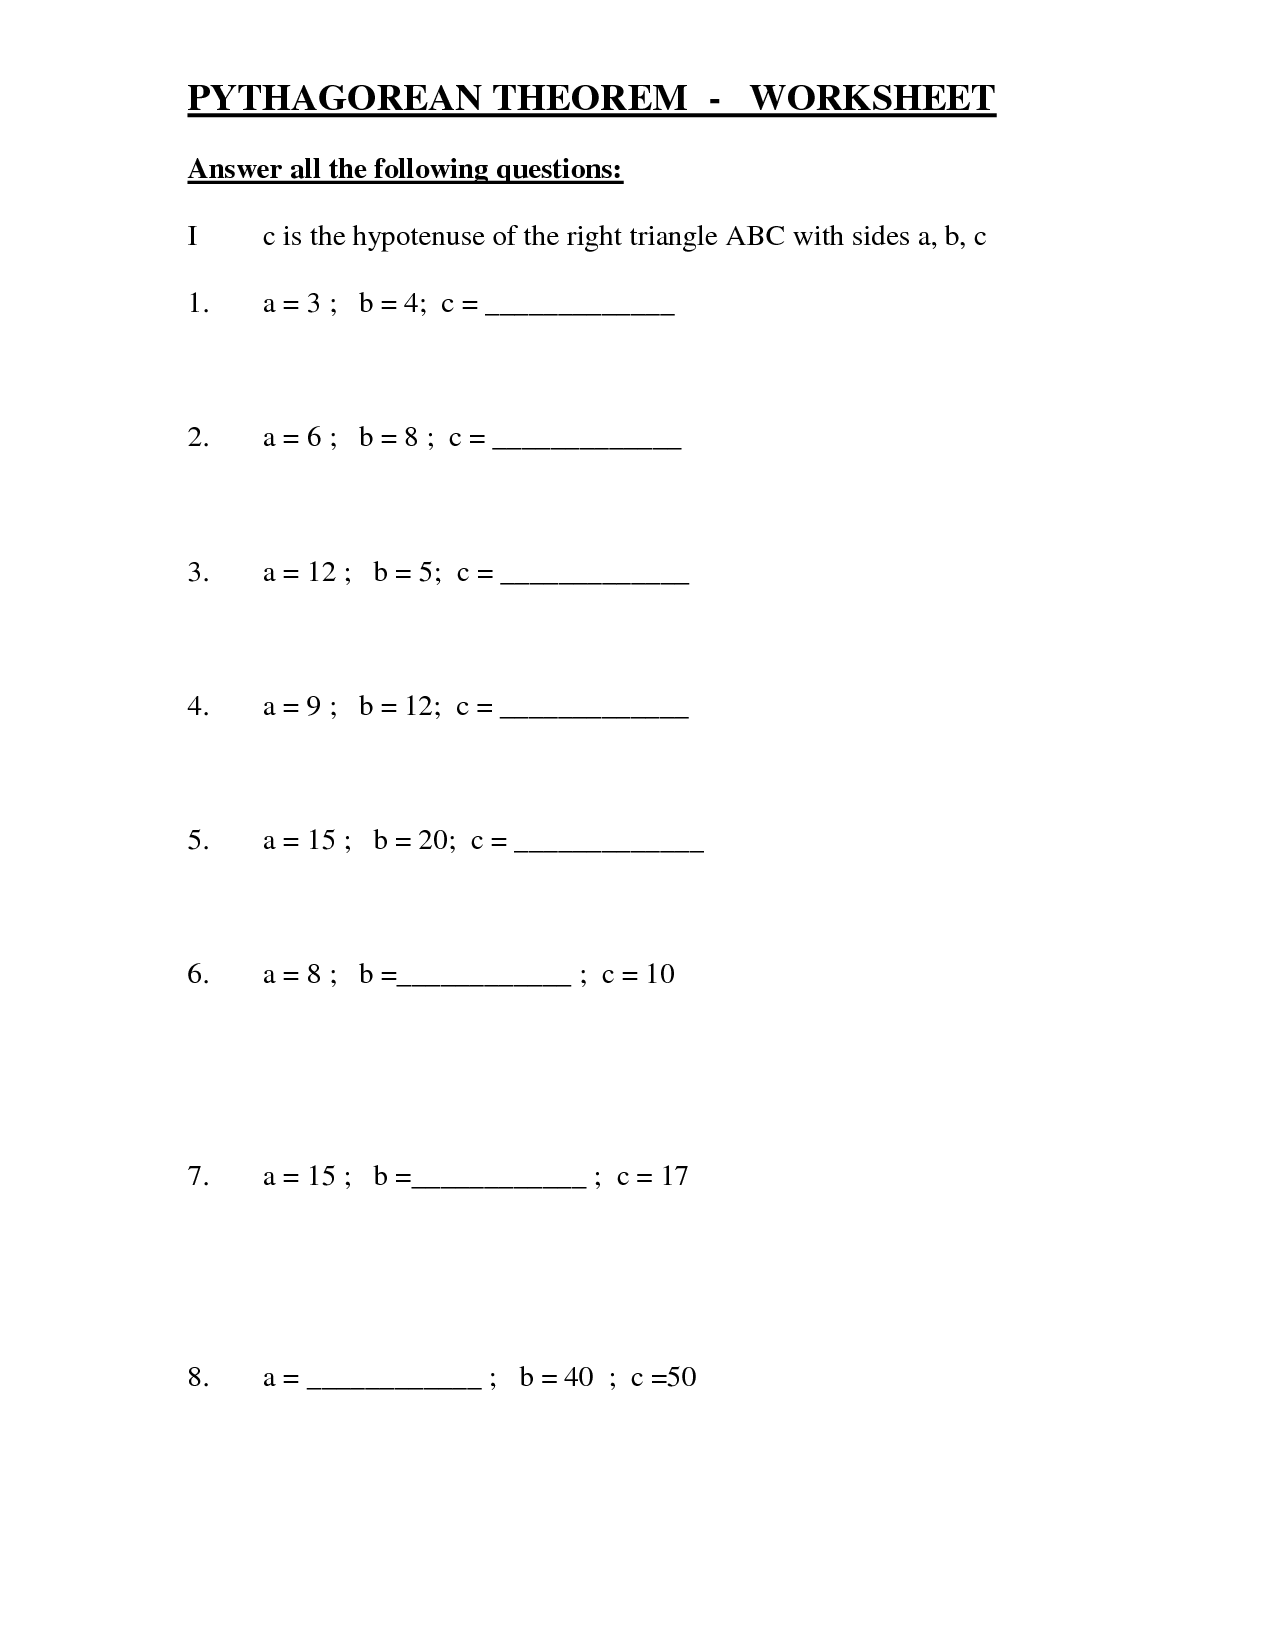 Right Triangle Pythagorean Theorem Worksheets Image